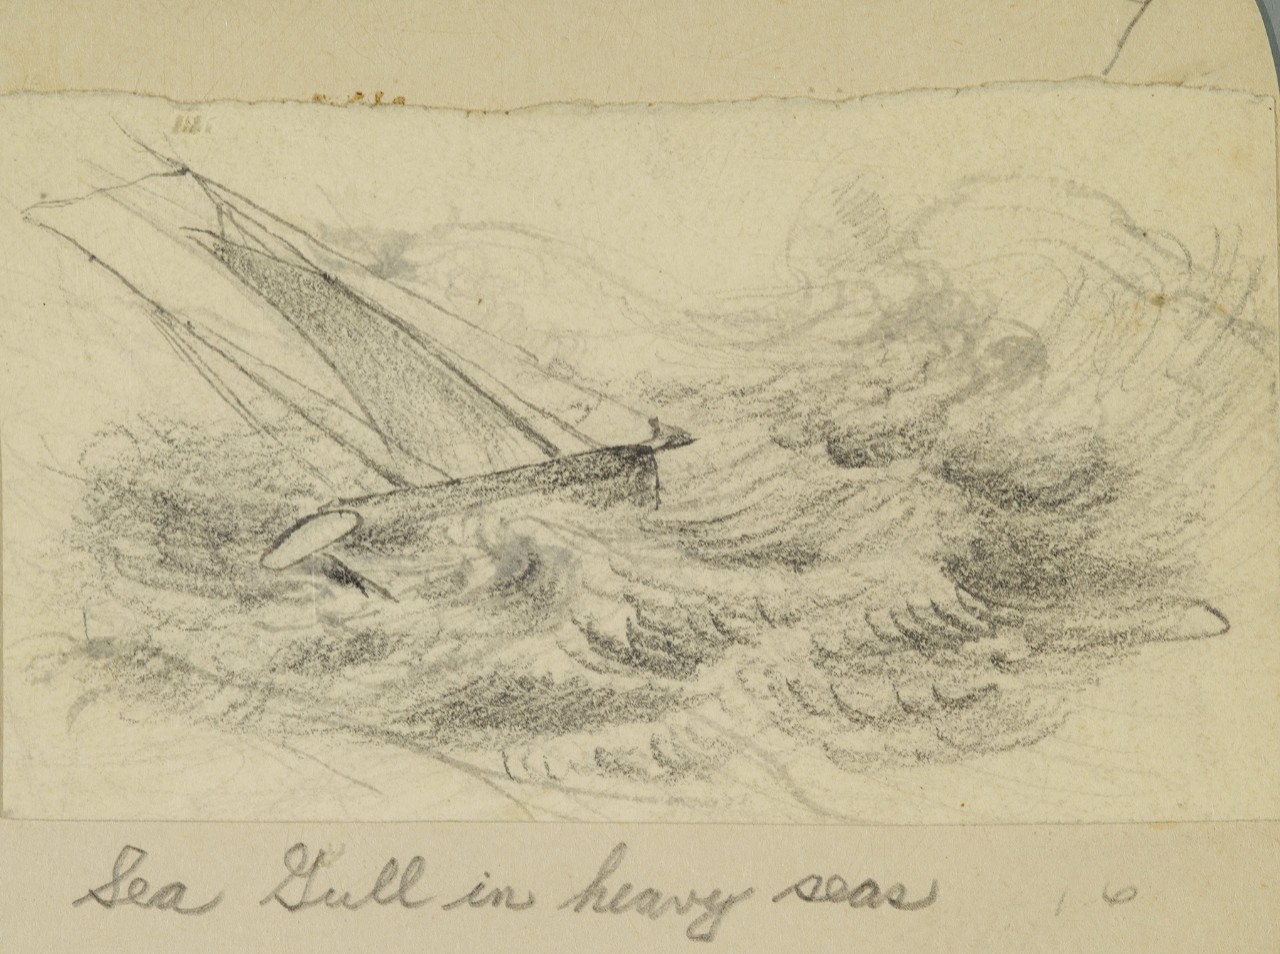 A sailing ship listing heavily to port side in rough seas